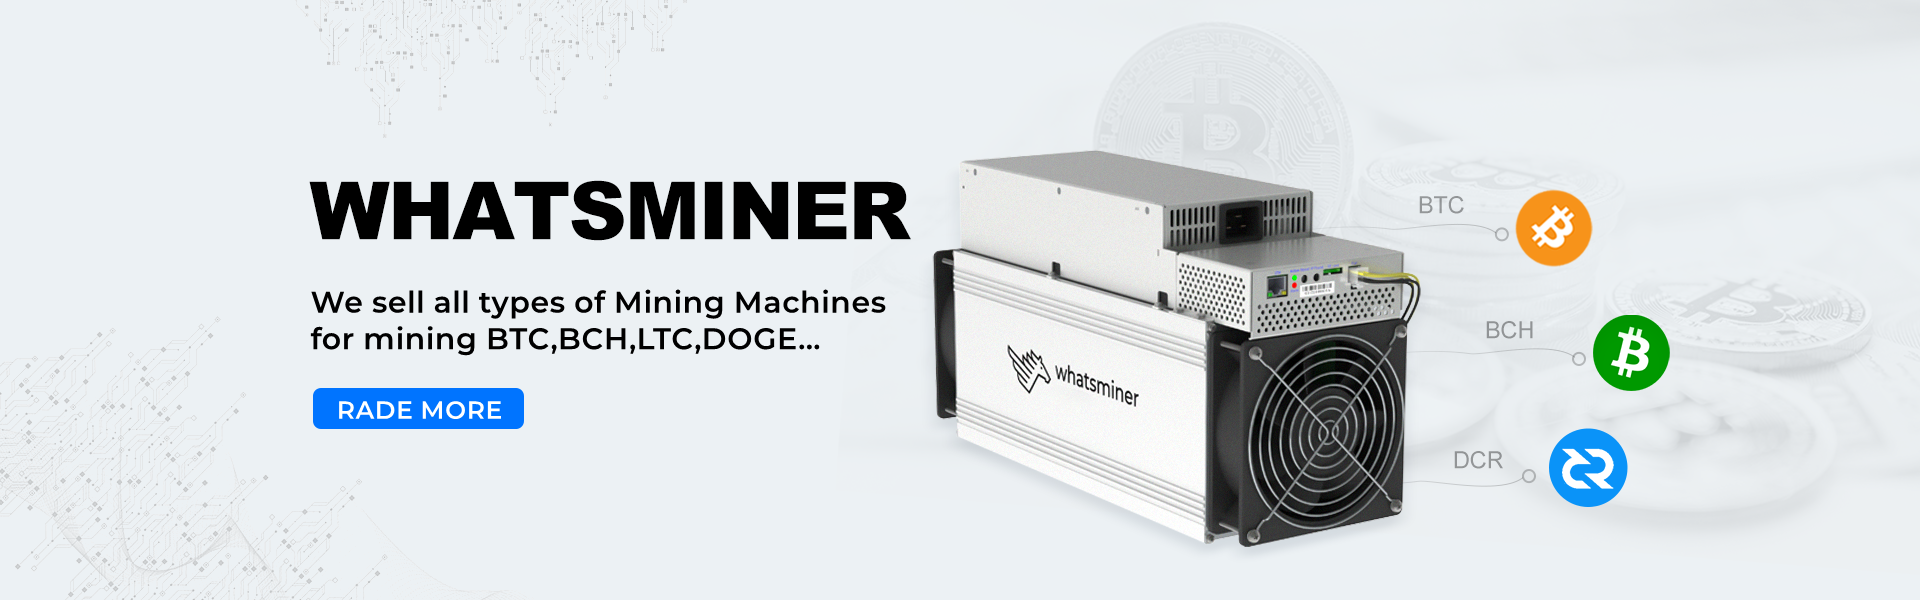 PC端WHATSMINER_副本